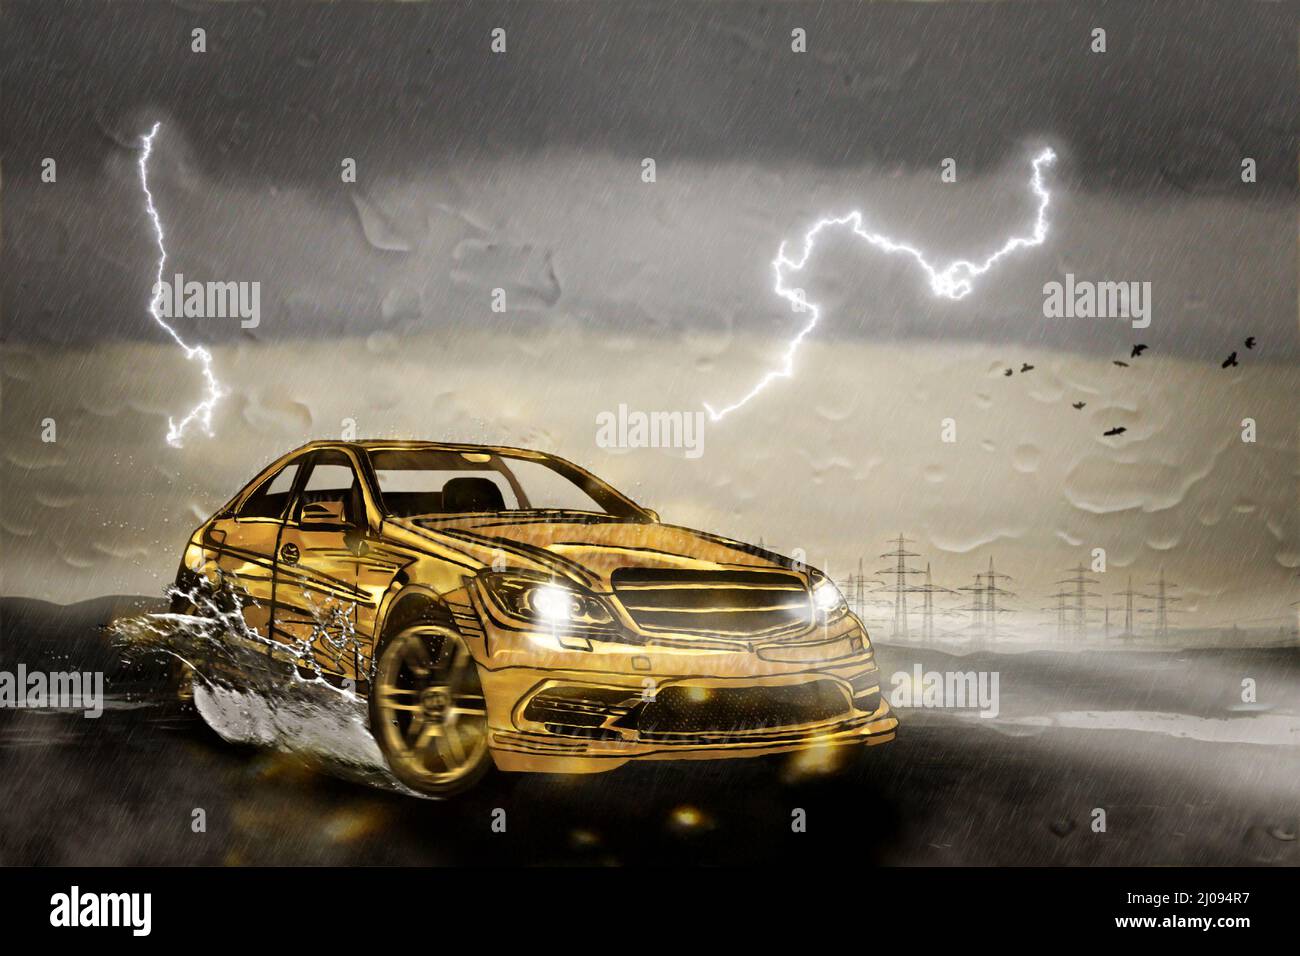 An illustrated golden limousine drives through a rainy weather. Lightning flashes in the sky. In a curve the car drives through a puddle. Stock Photo